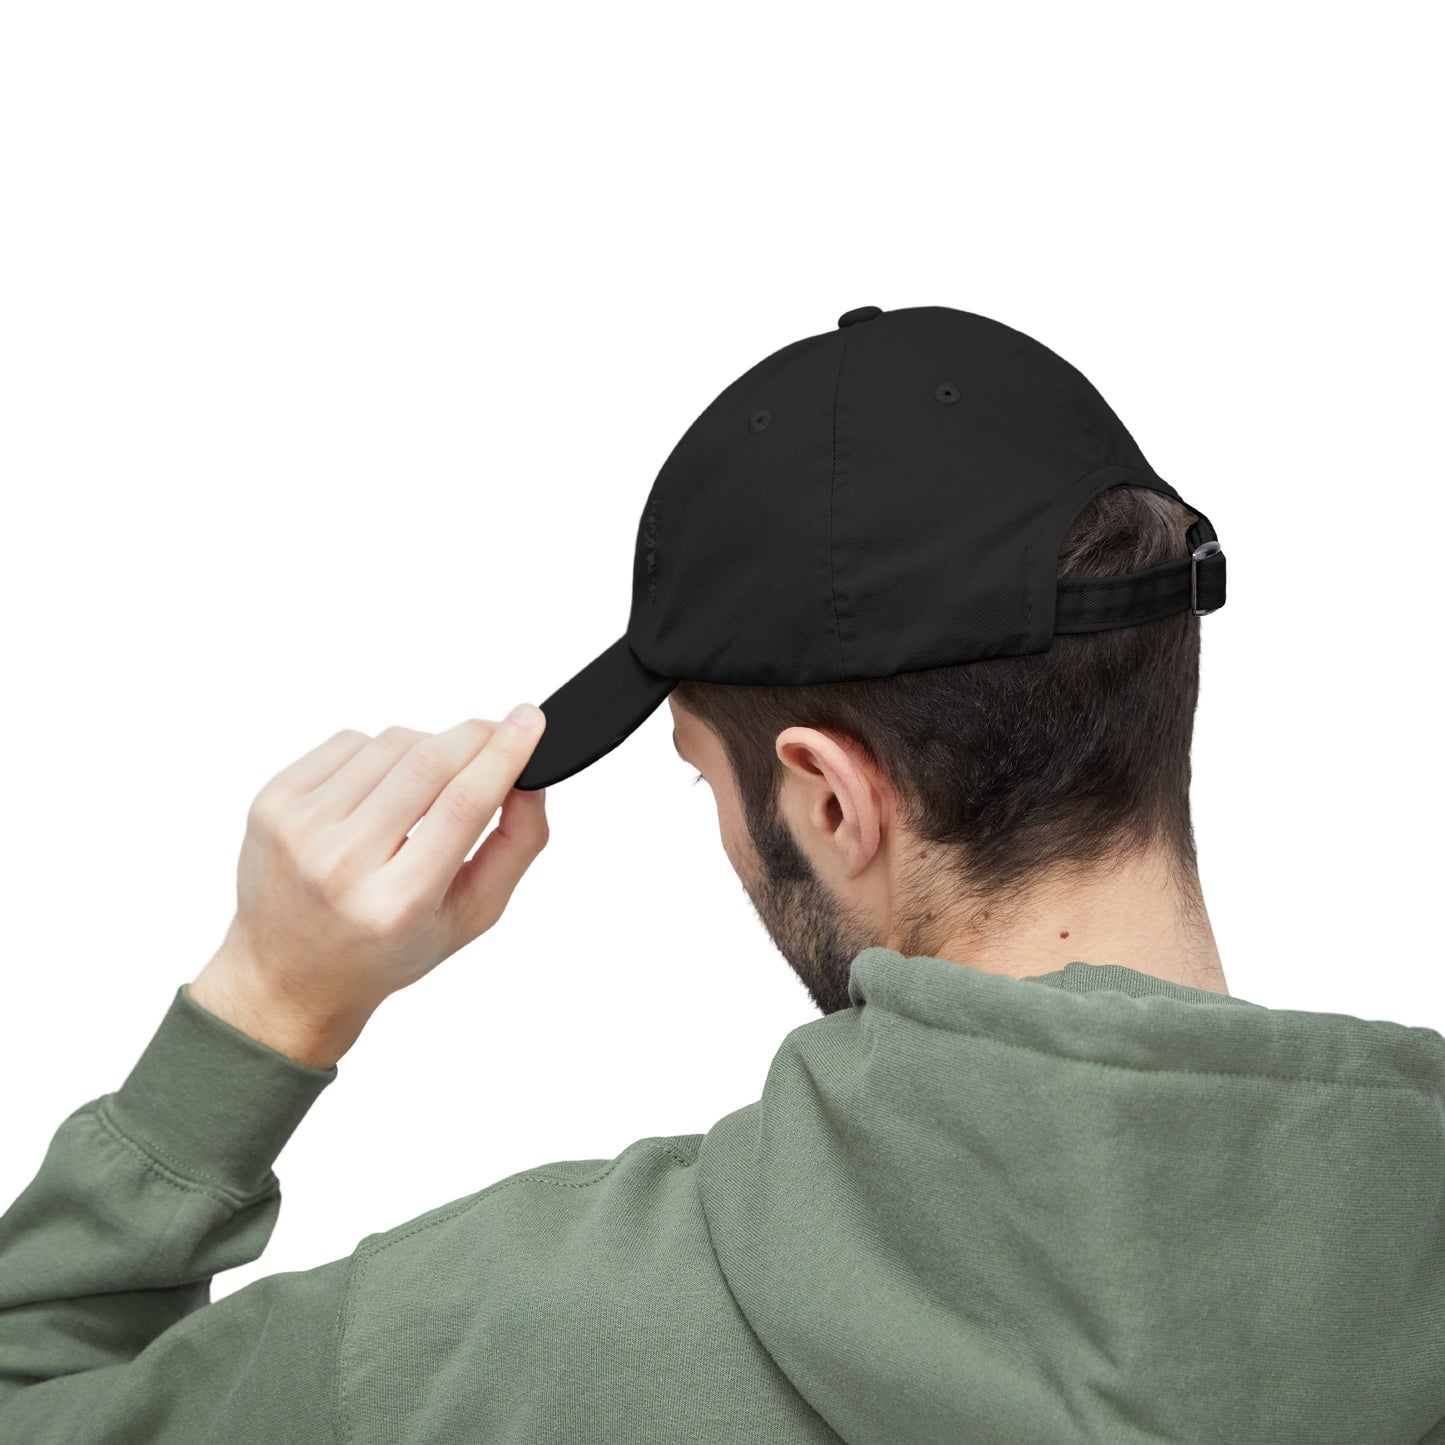 This image showcases the back view of a man wearing a hat and the adjustment strap.